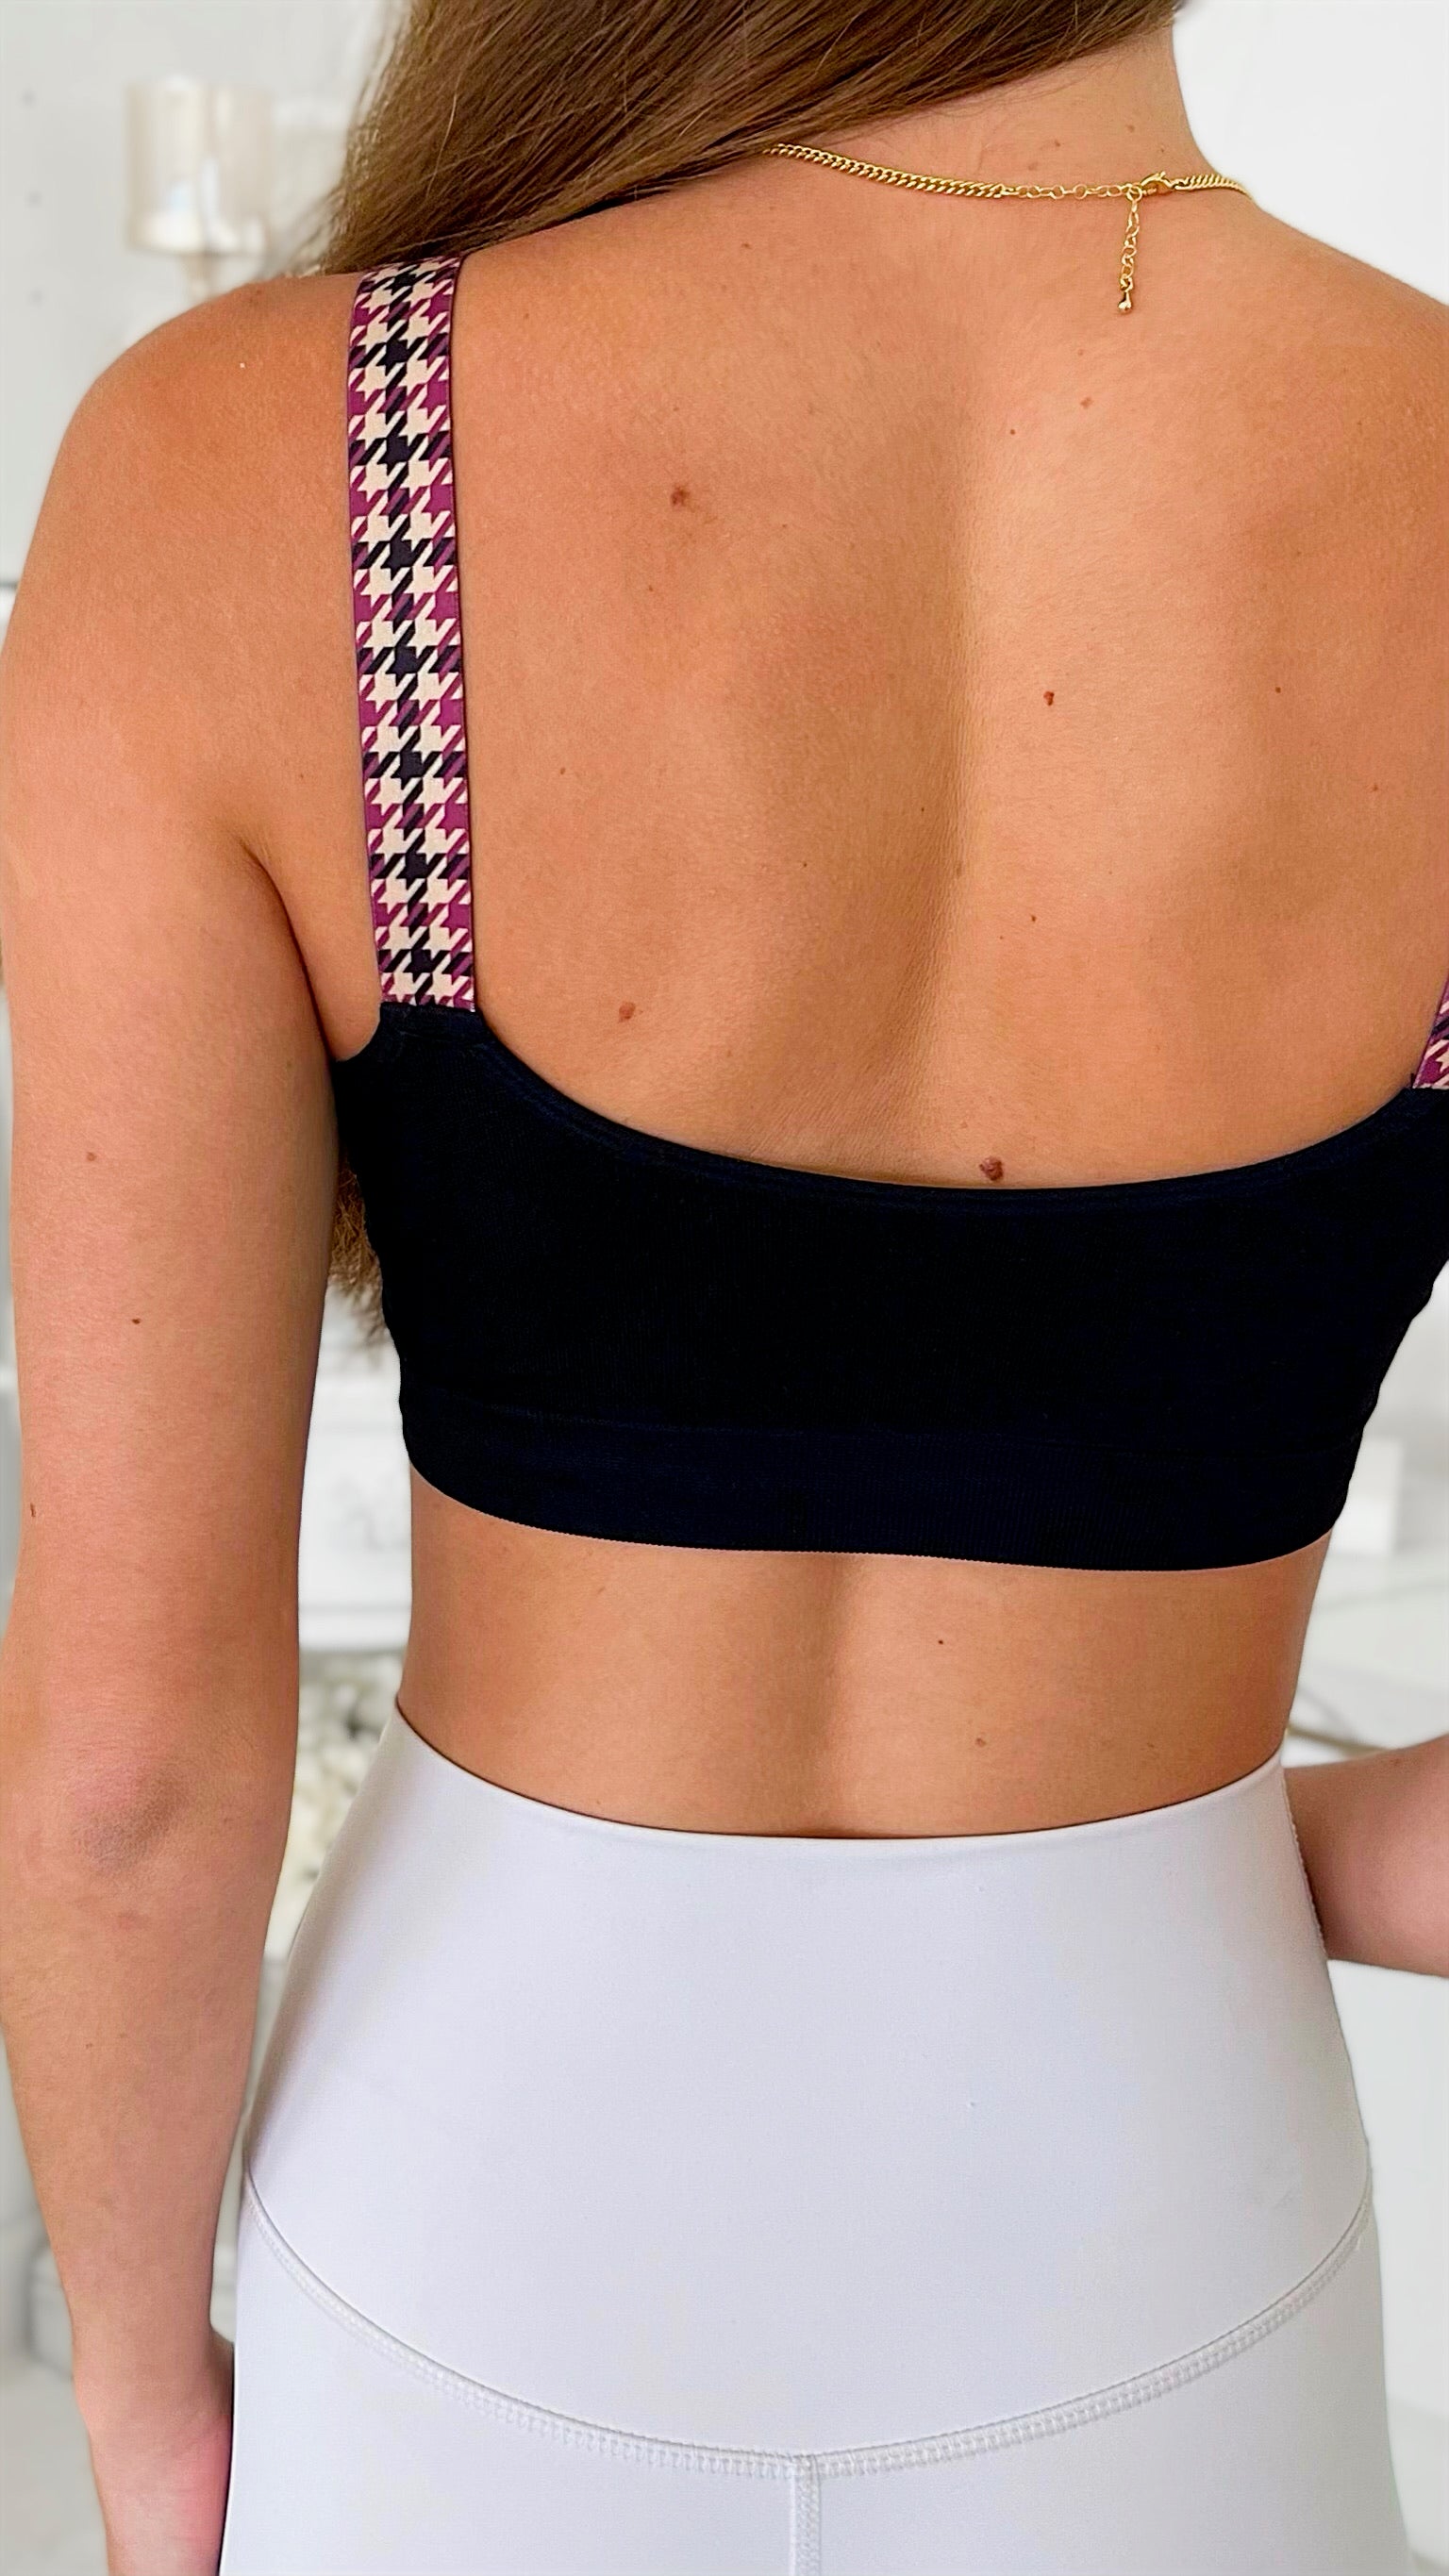 Houndstooth On Black Bra-220 Intimates-Strap-its-Coastal Bloom Boutique, find the trendiest versions of the popular styles and looks Located in Indialantic, FL